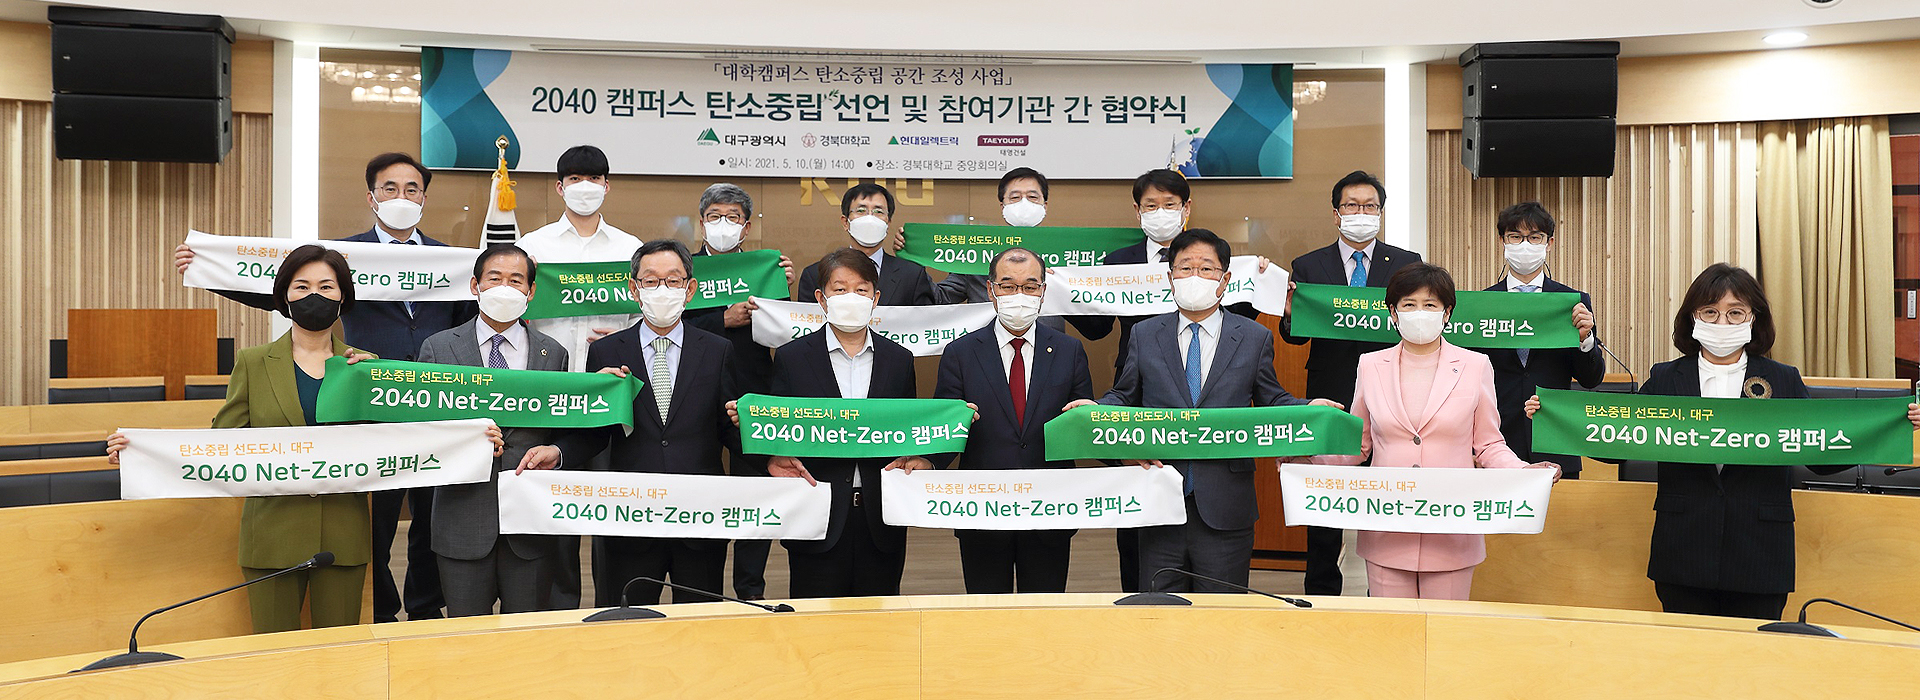 Kyungpook National University To Build 2040 Carbon Neutral Campus 관련이미지